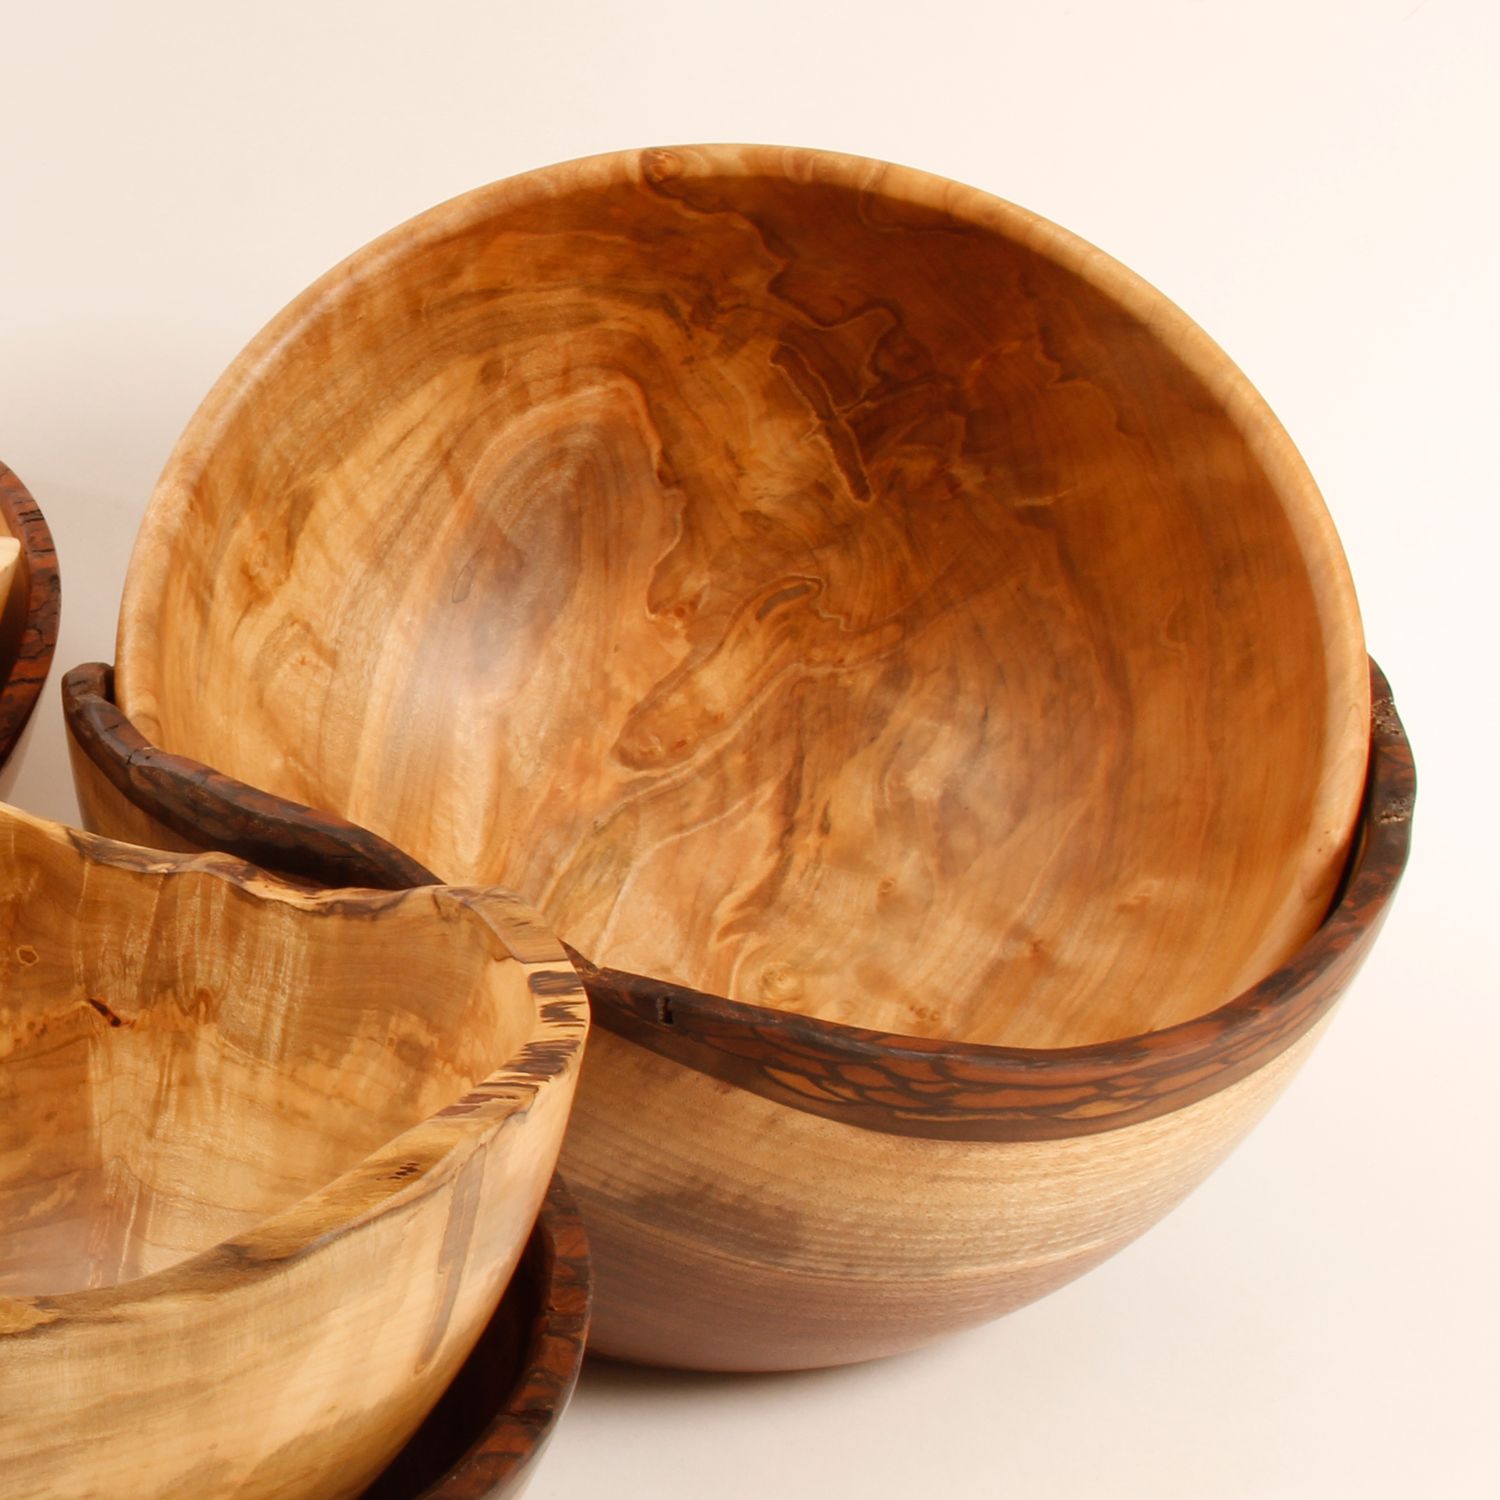 Michael Sbrocca: Large Maple Bowl Product Image 3 of 4